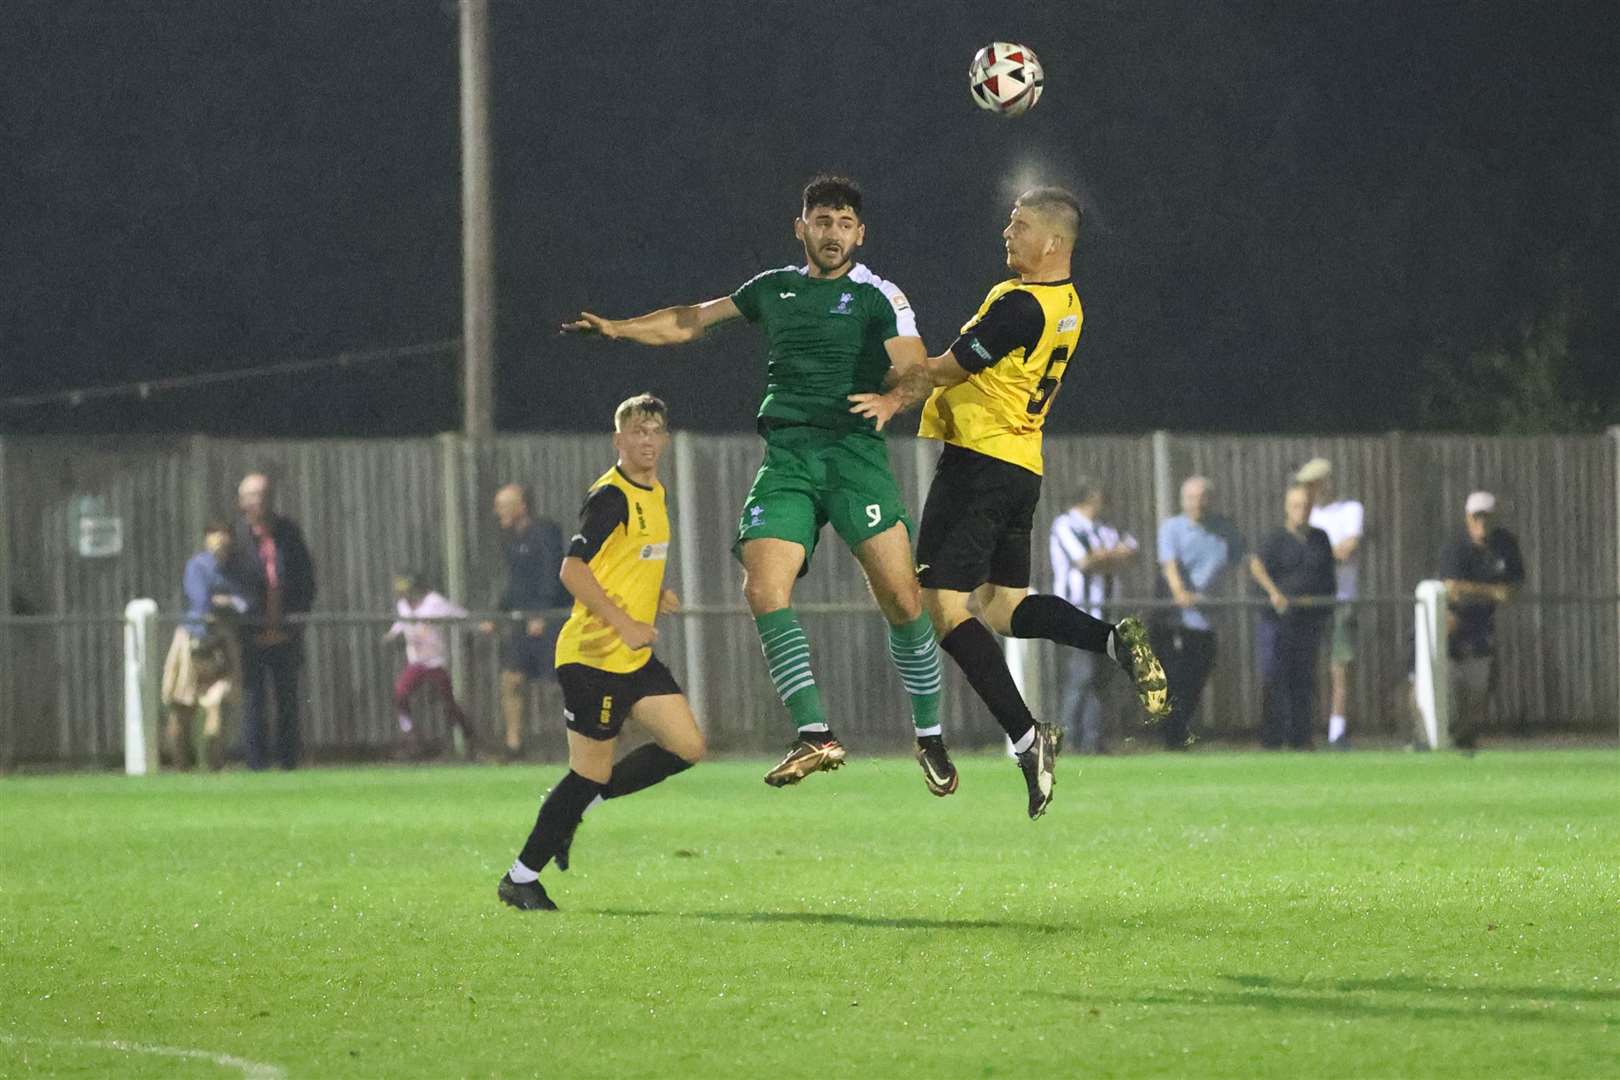 Josh Youngs was magnificent at the back for Fakenham. Picture: Ronnie Heyhoe